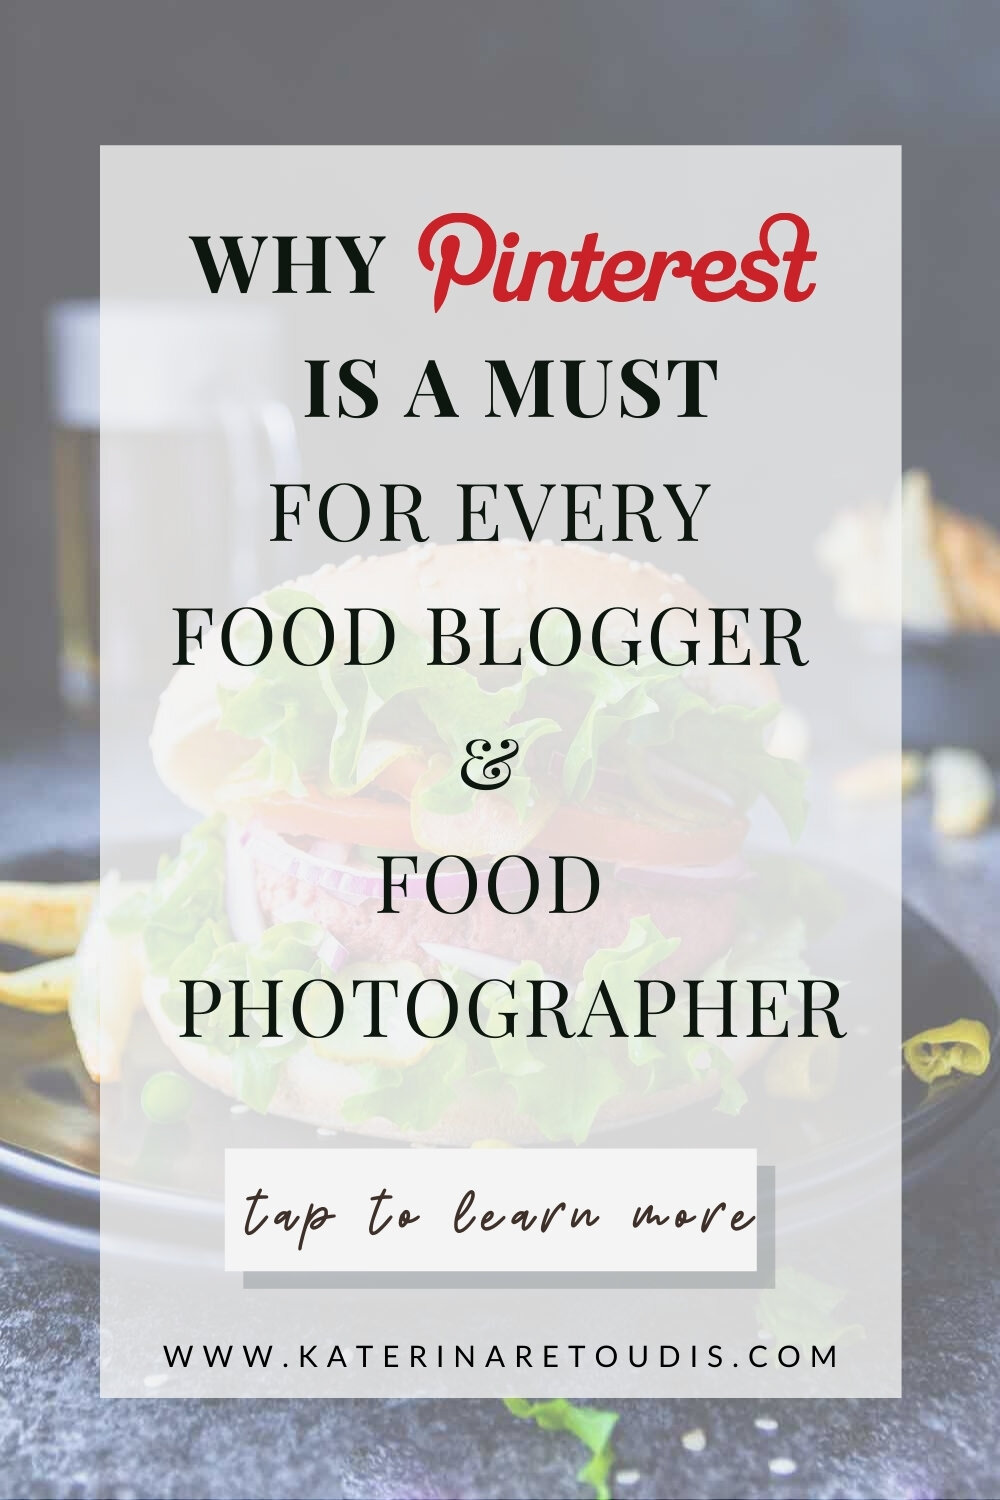 Why Pinterest Is a MUST For Every Food Blogger & Food Photographer